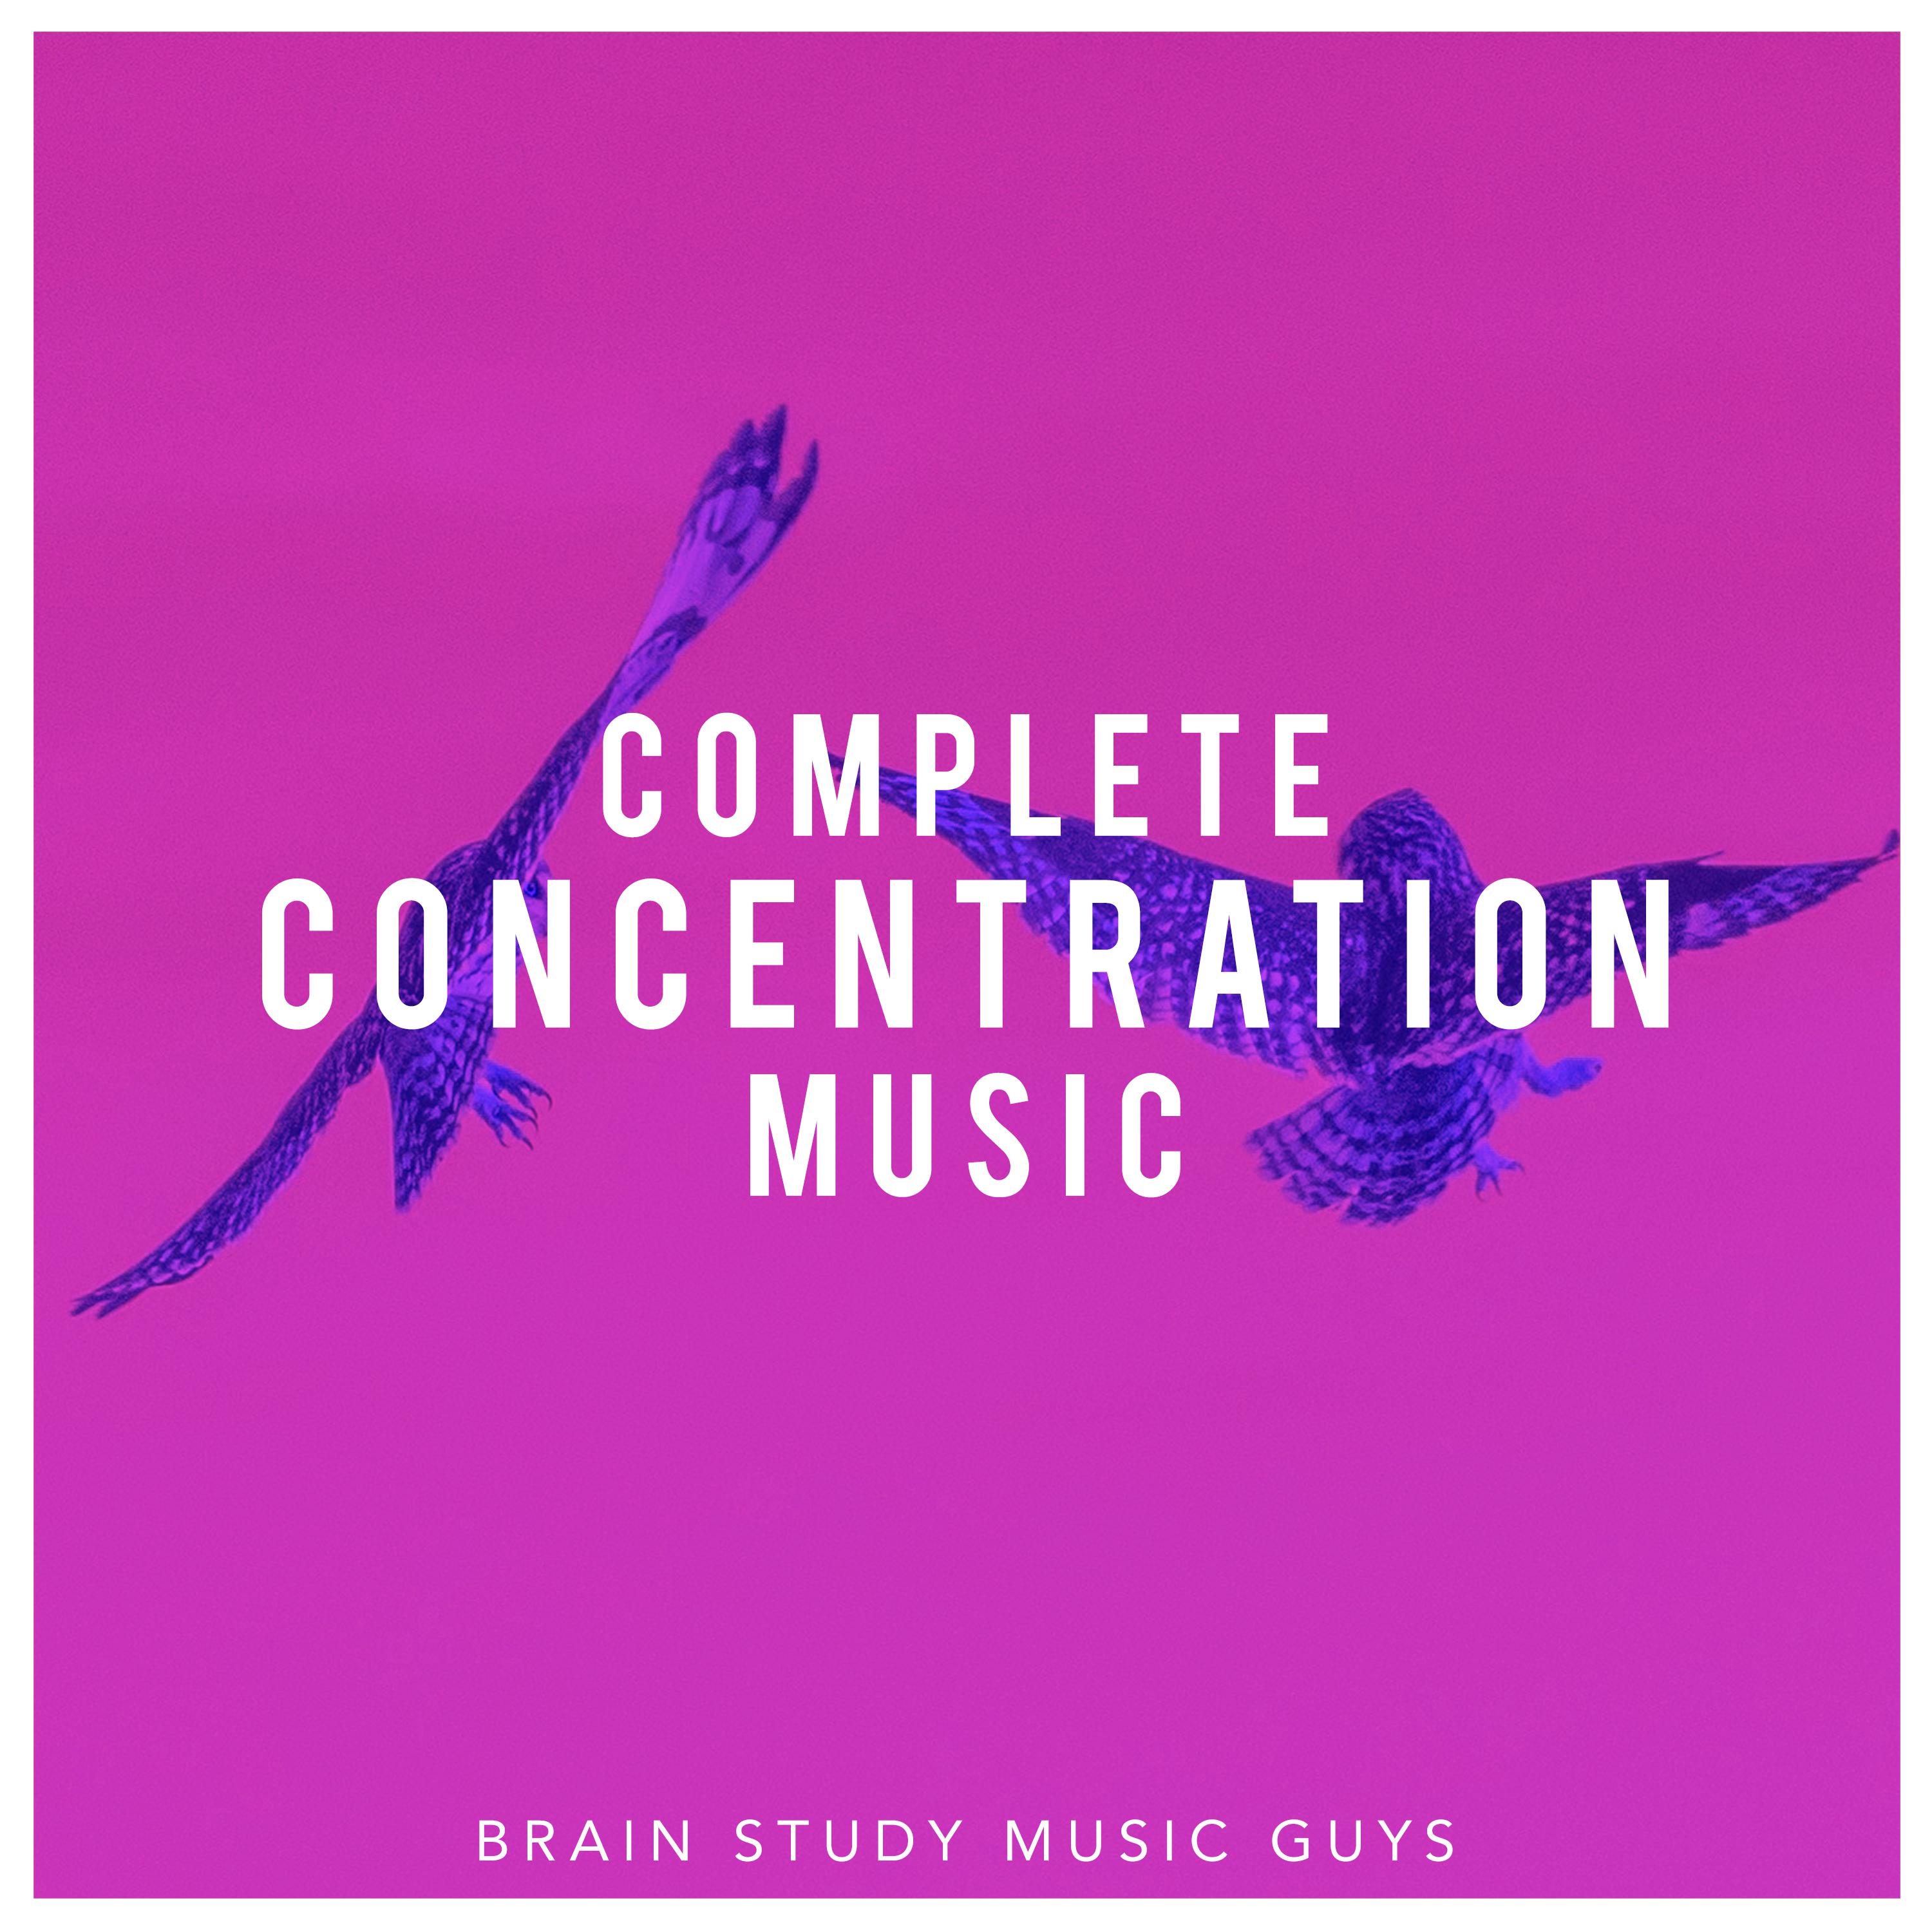 Complete Concentration Music